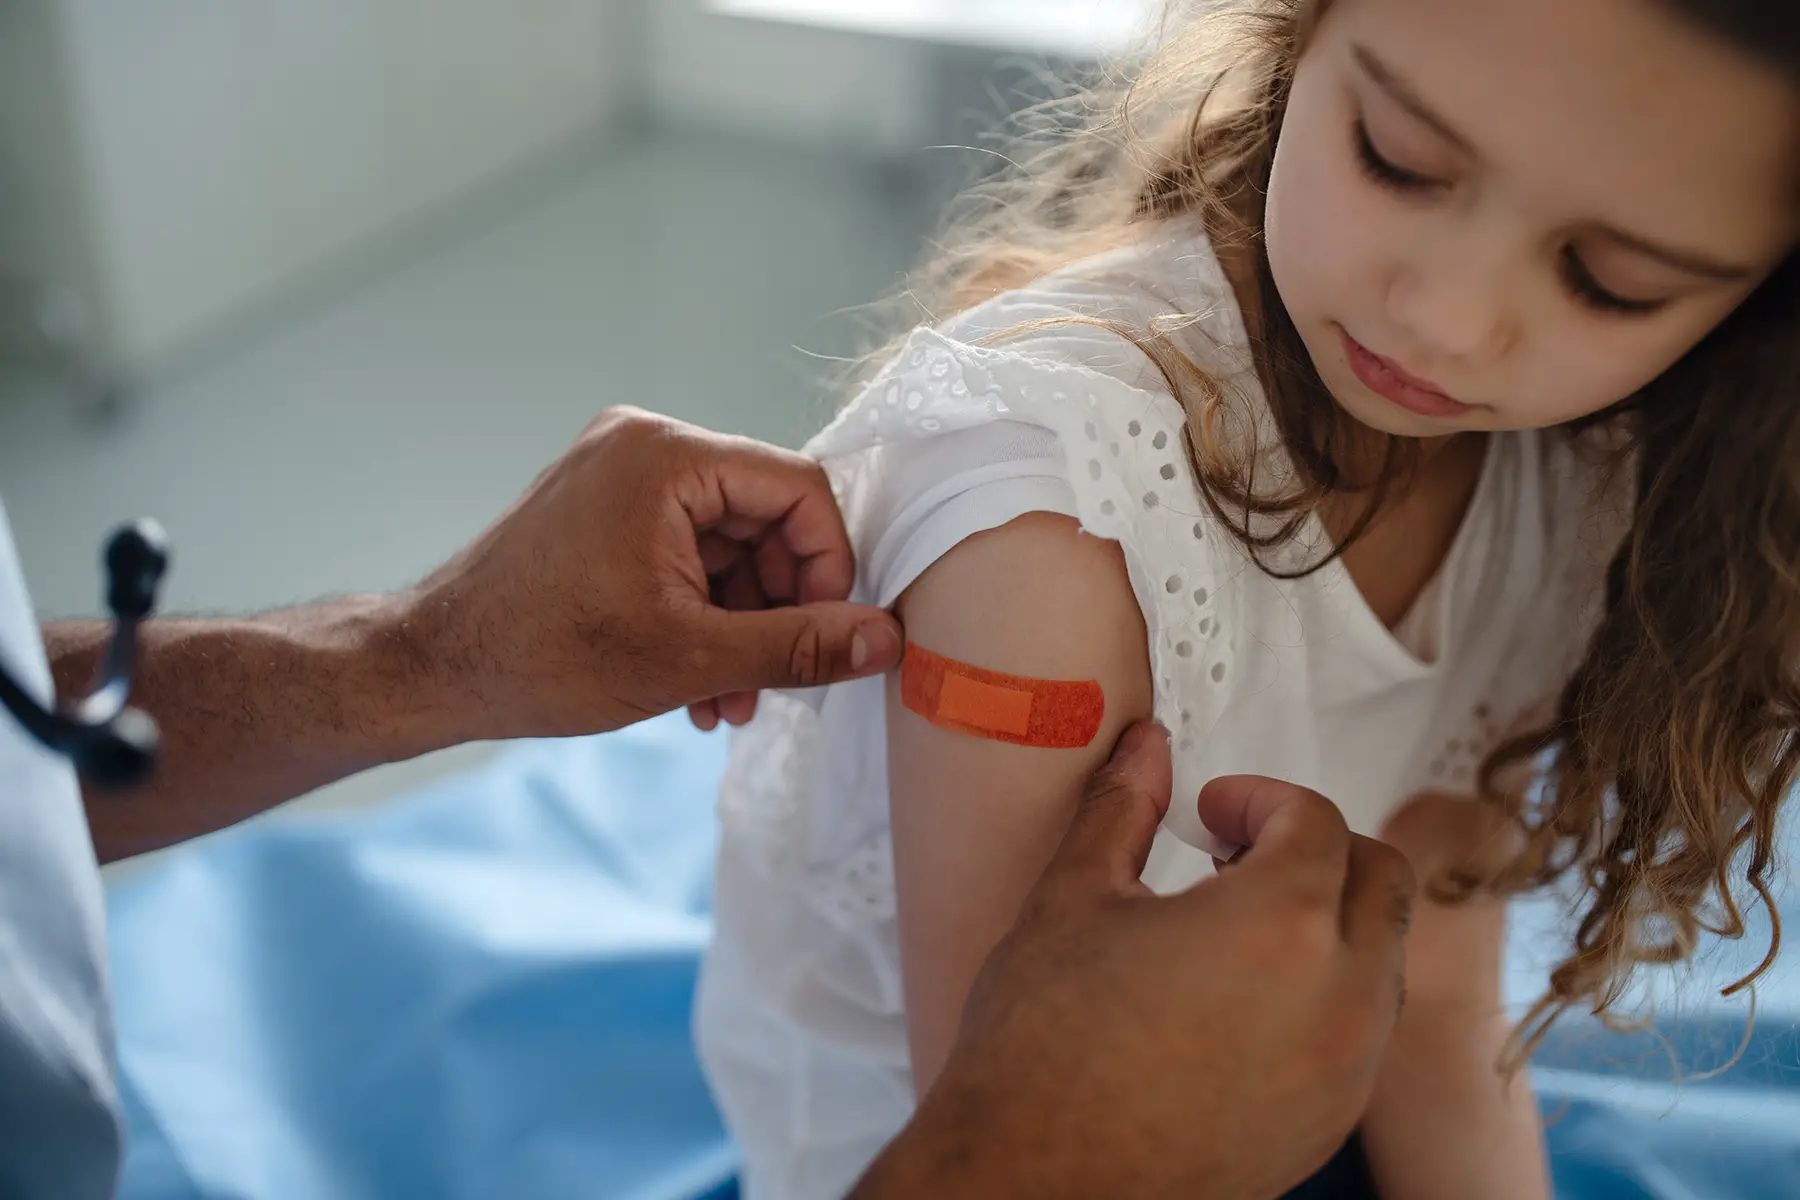 Doctor puts plaster on girl's arm